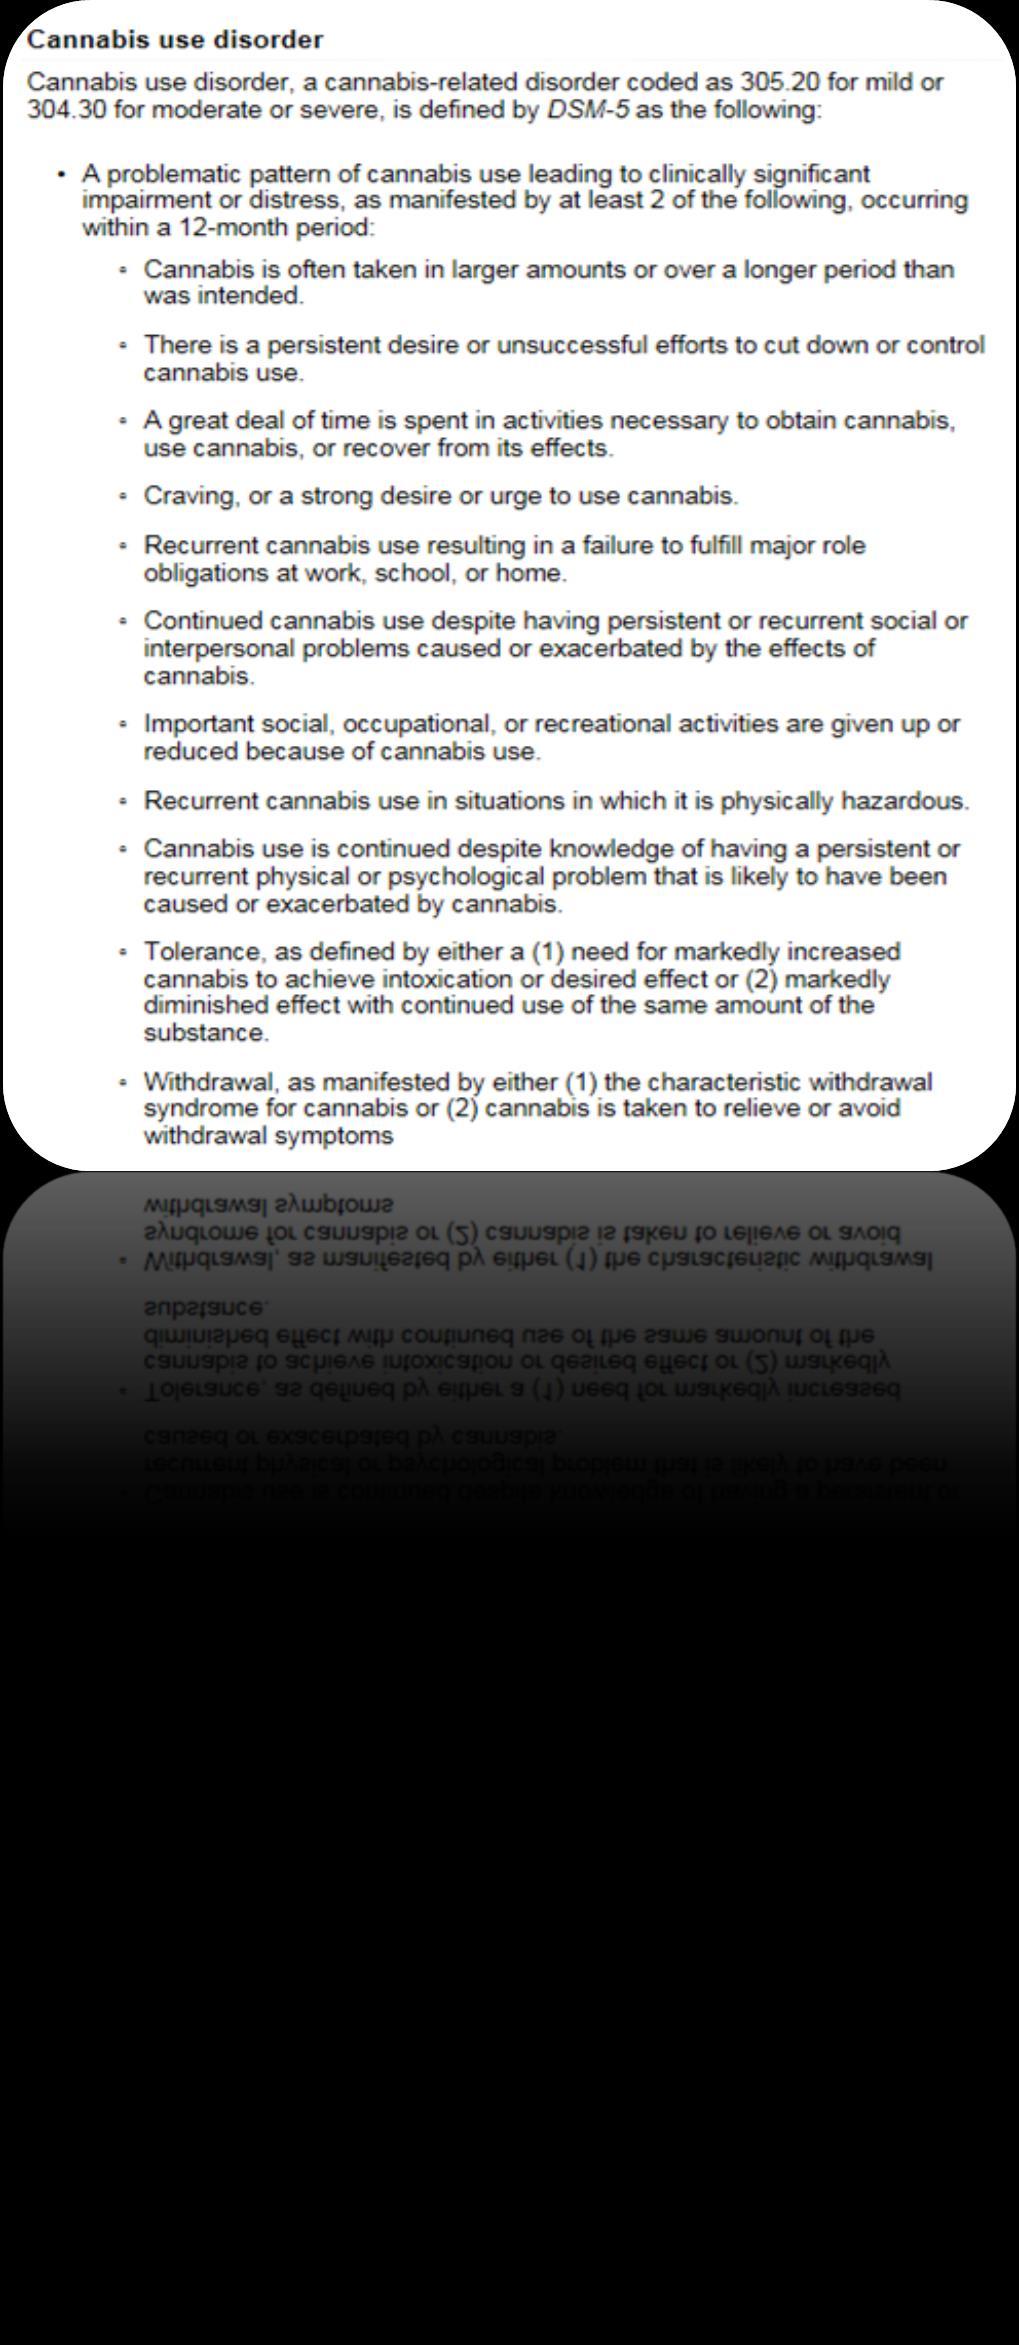 CANNABIS USE DISORDER DSM-5. Diagnostic and Statistical Manual of Mental Disorders (DSM) is the standard classification of mental disorders used in the U.S. by mental health professionals.